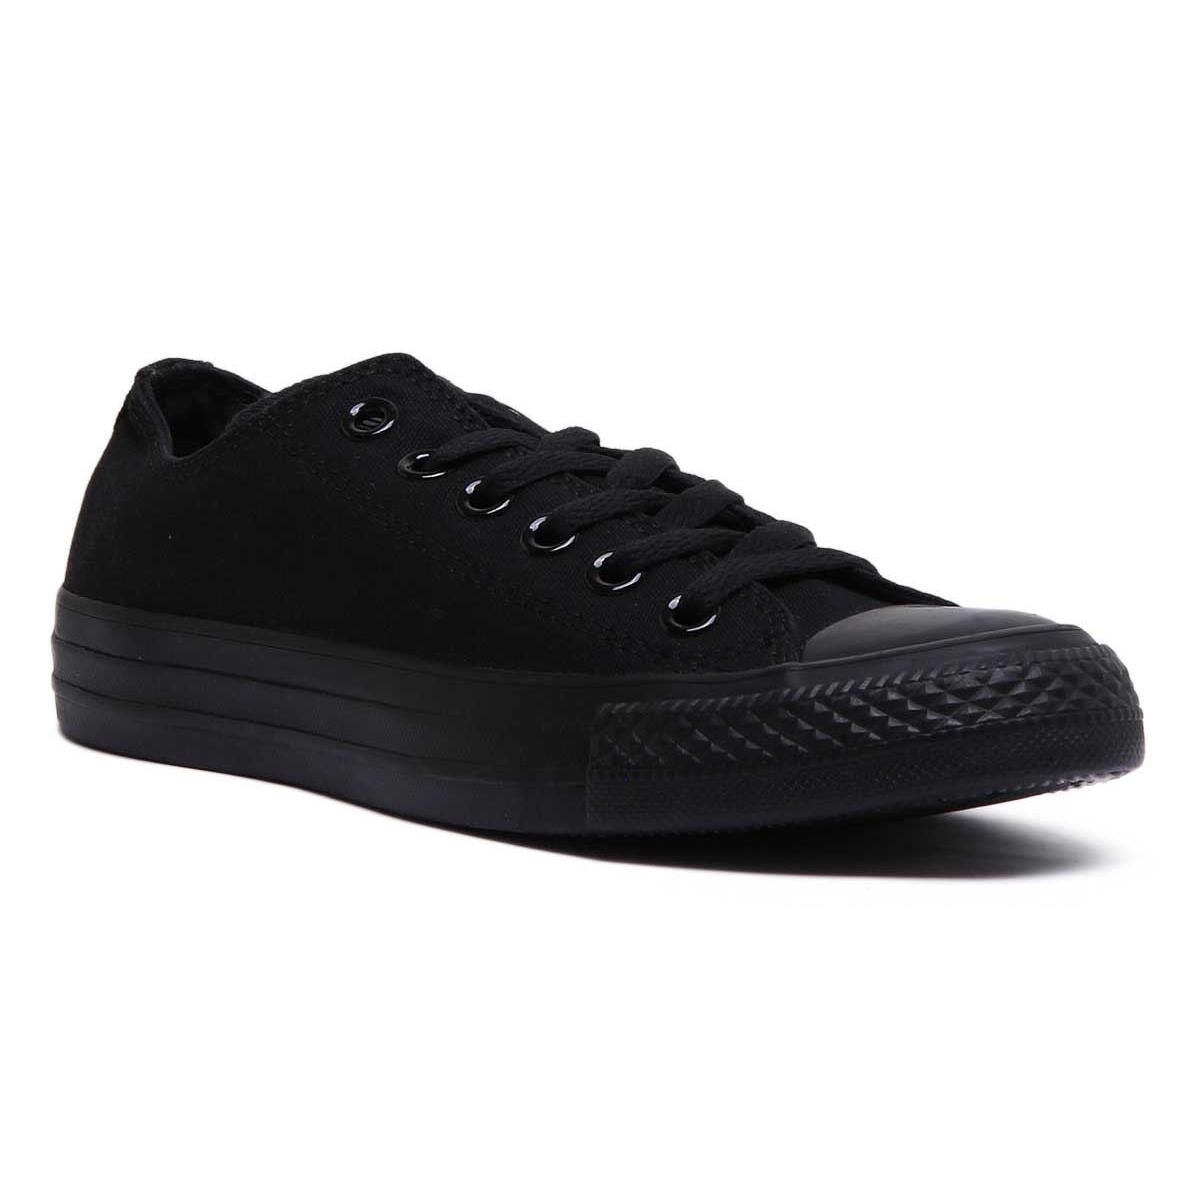 Converse M5039 Unisex Lace Up Low Top Canvas Sneakers In Black Size US 4 - 11 Black